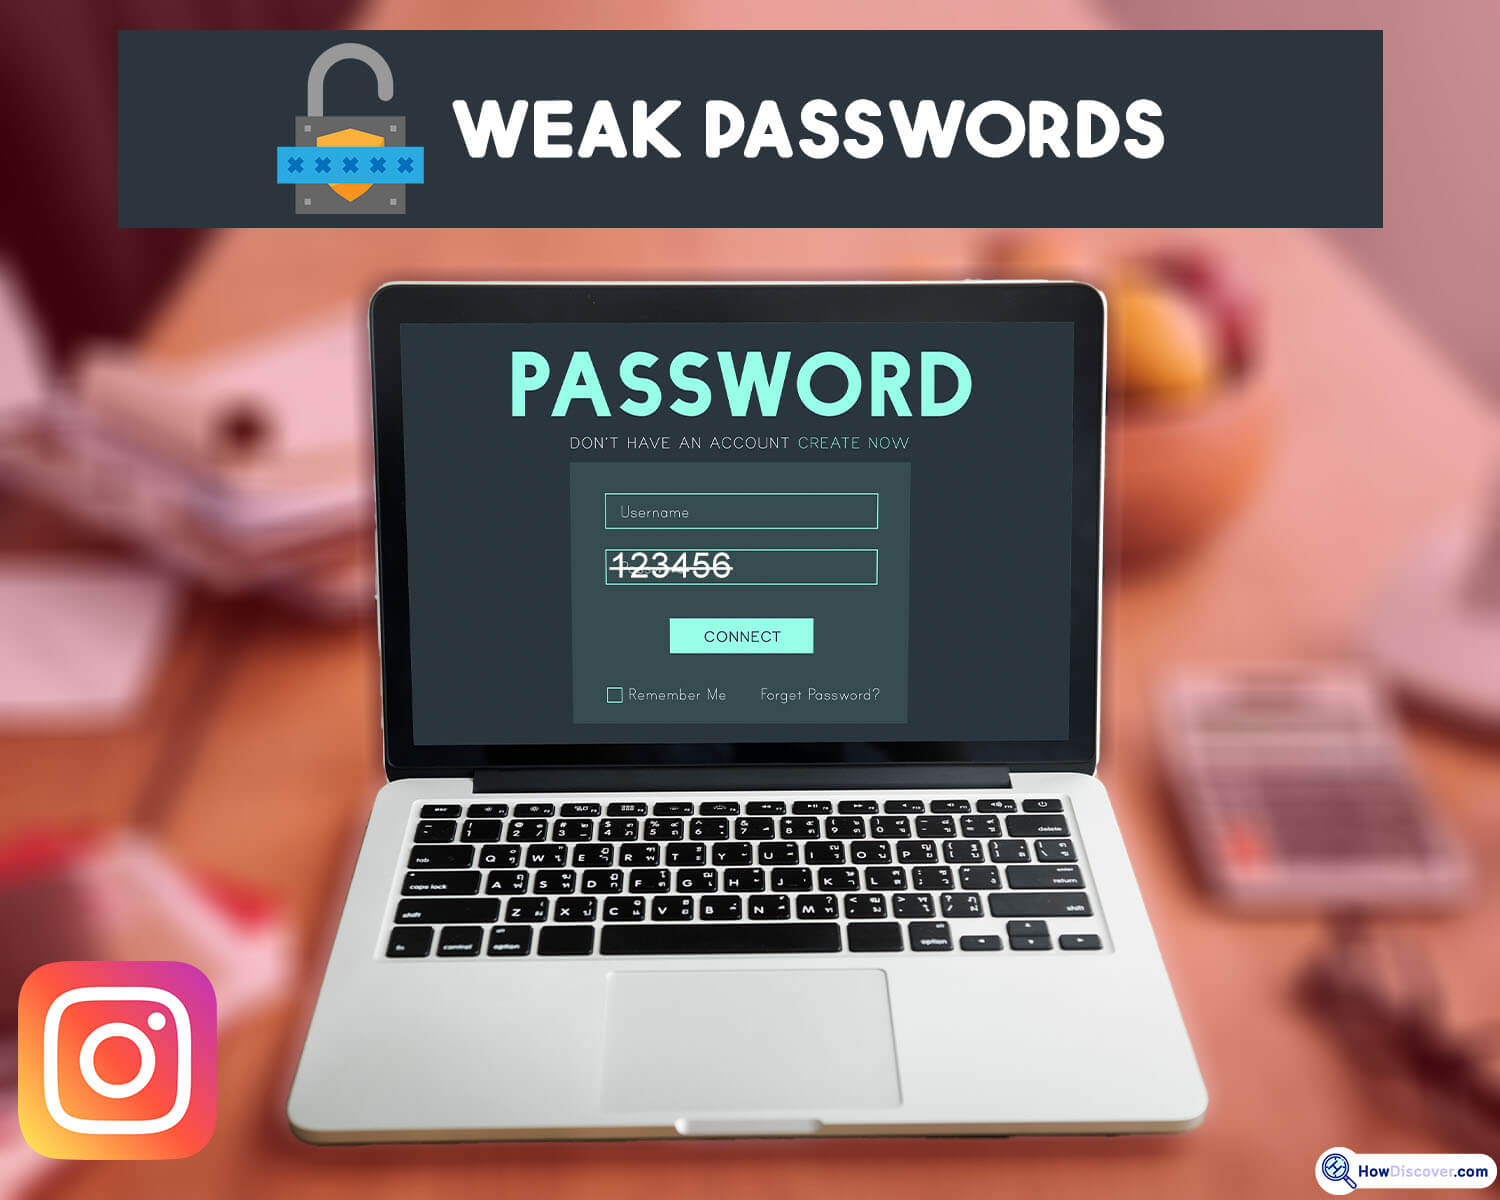 Weak passwords - Instagram Account Being Hacked, Email & Phone Number Changed